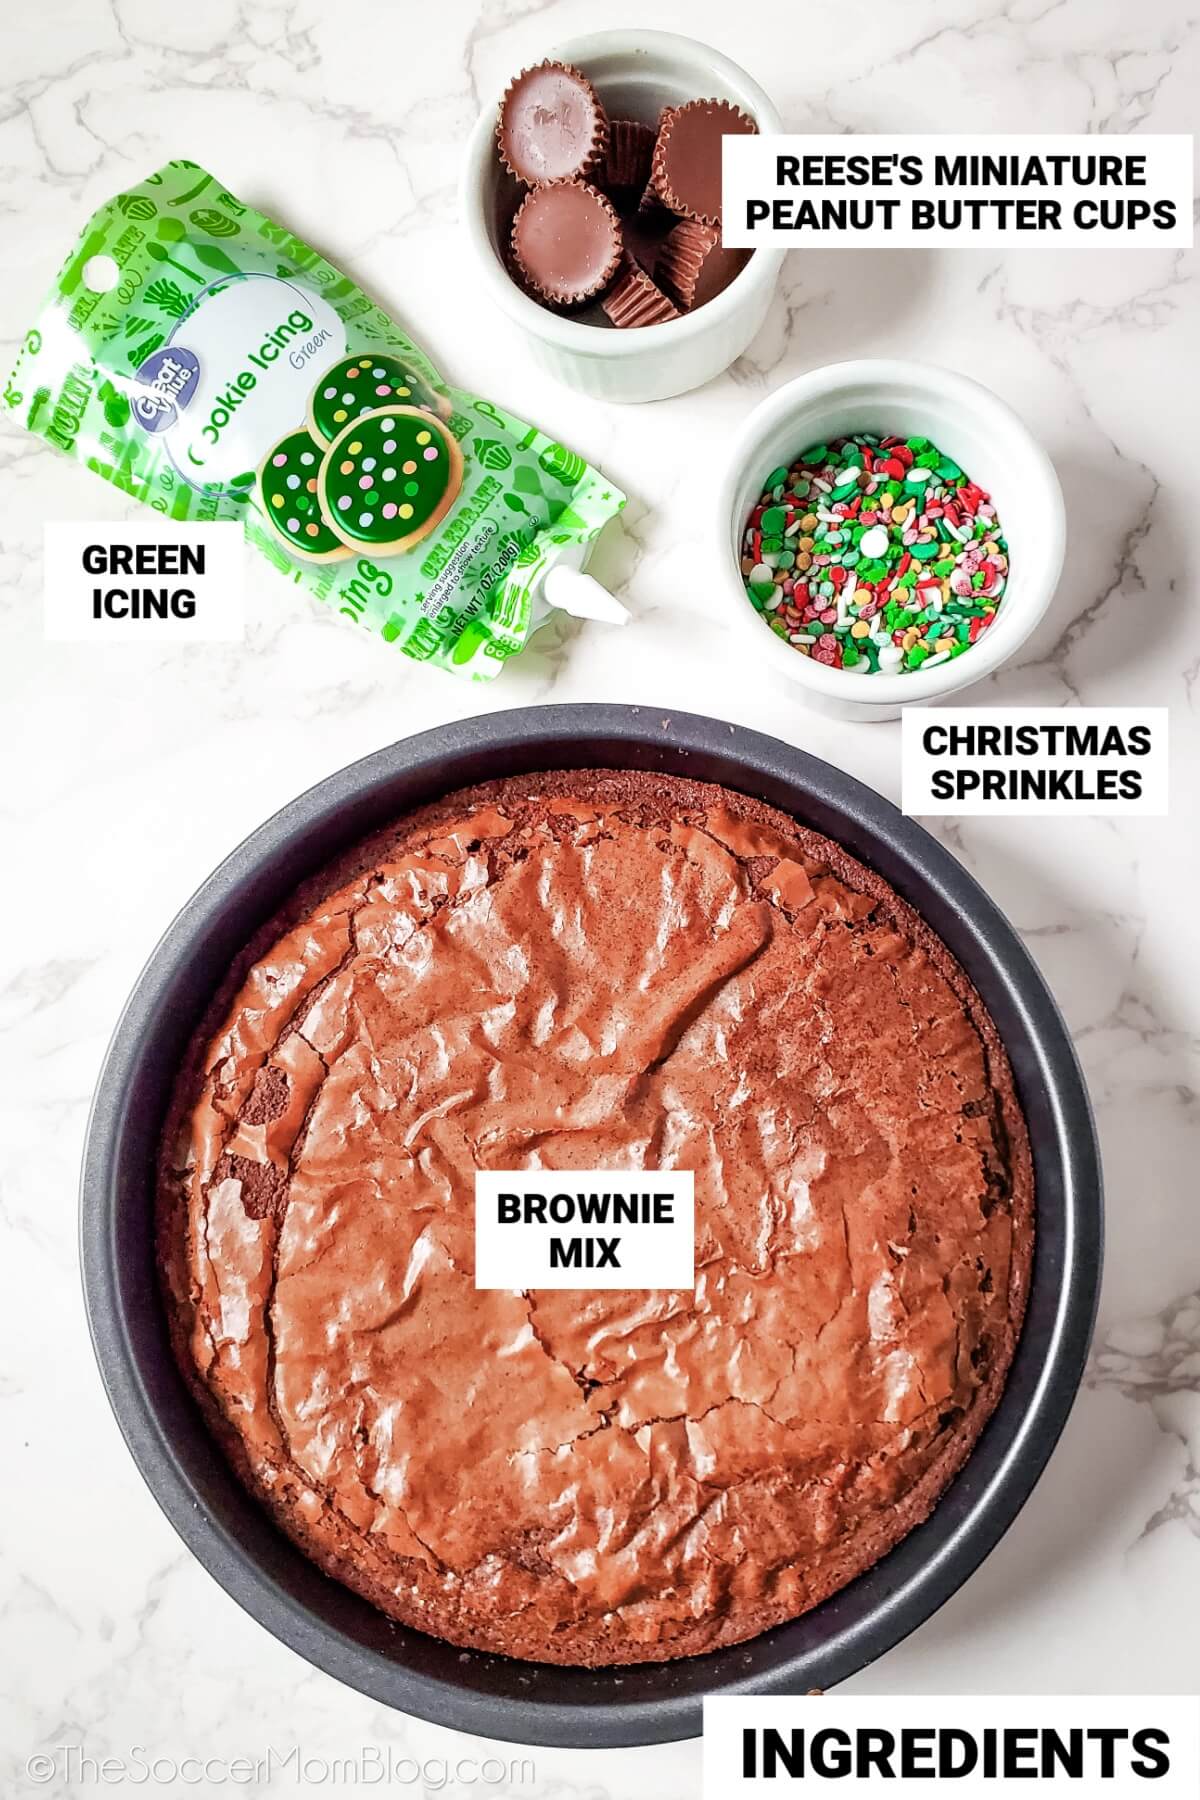 Christmas tree brownies ingredients, with text labels: brownie mix, mini Reese's, green icing, Christmas sprinkles.